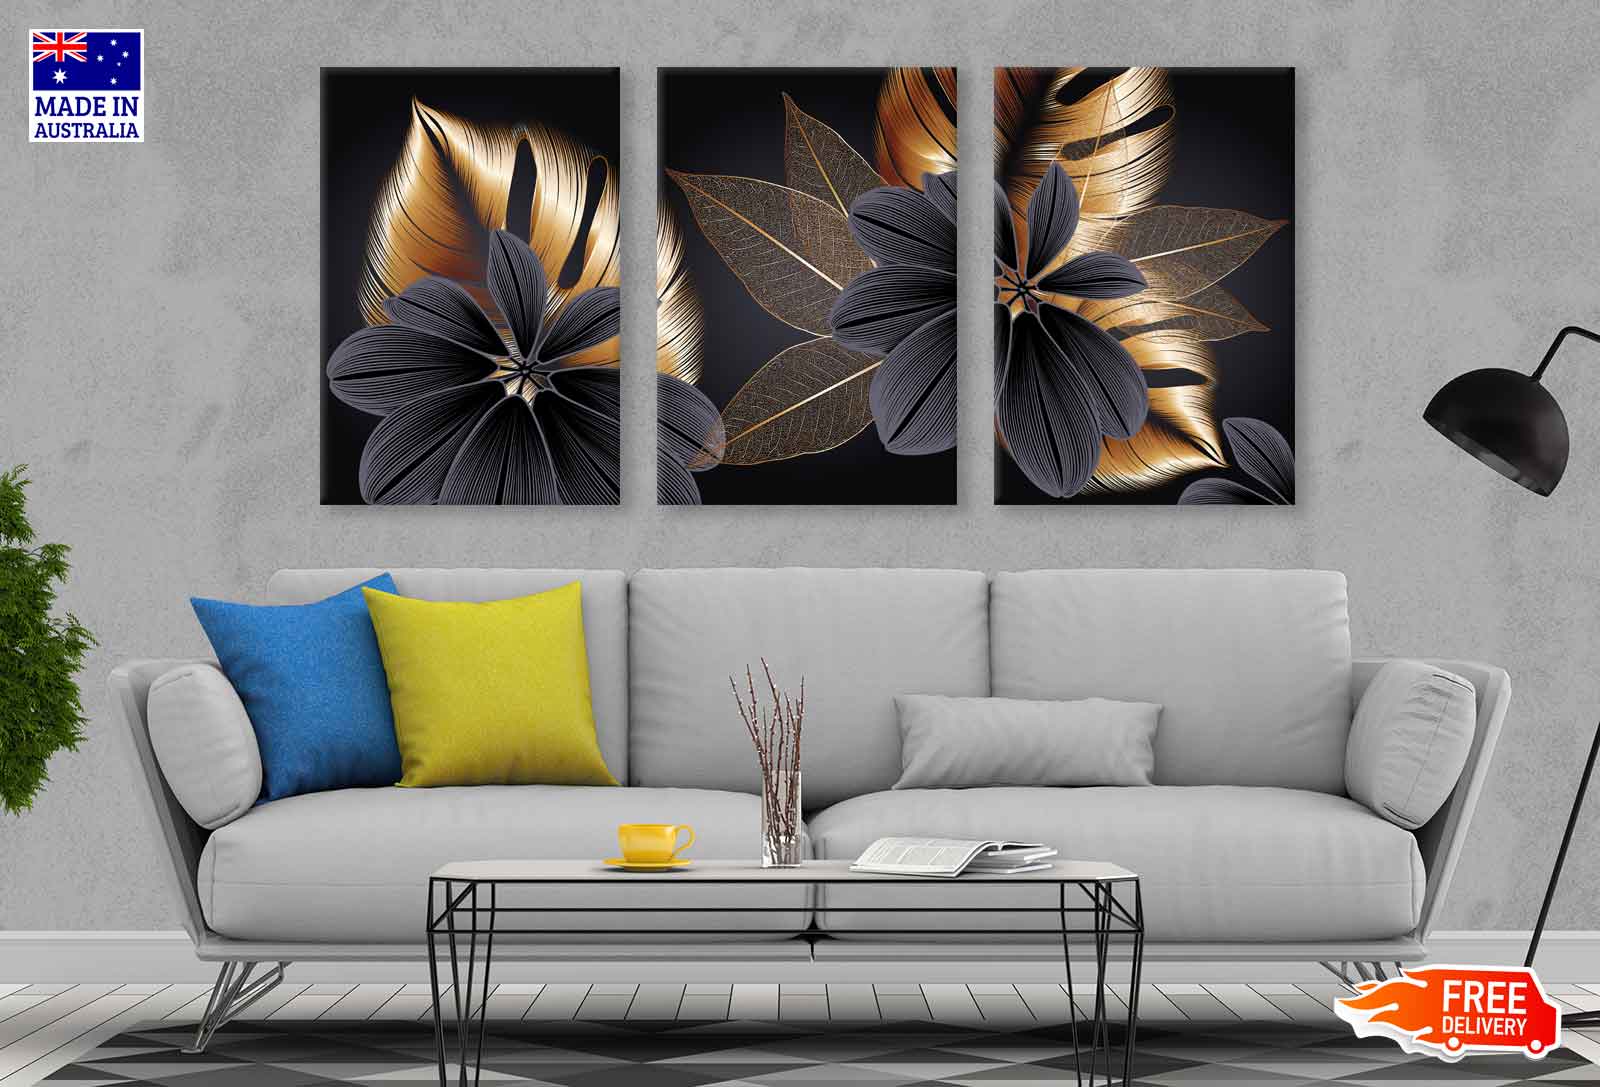 3 Set of Gold Floral Abstract High Quality Print 100% Australian Made Wall Canvas Ready to Hang